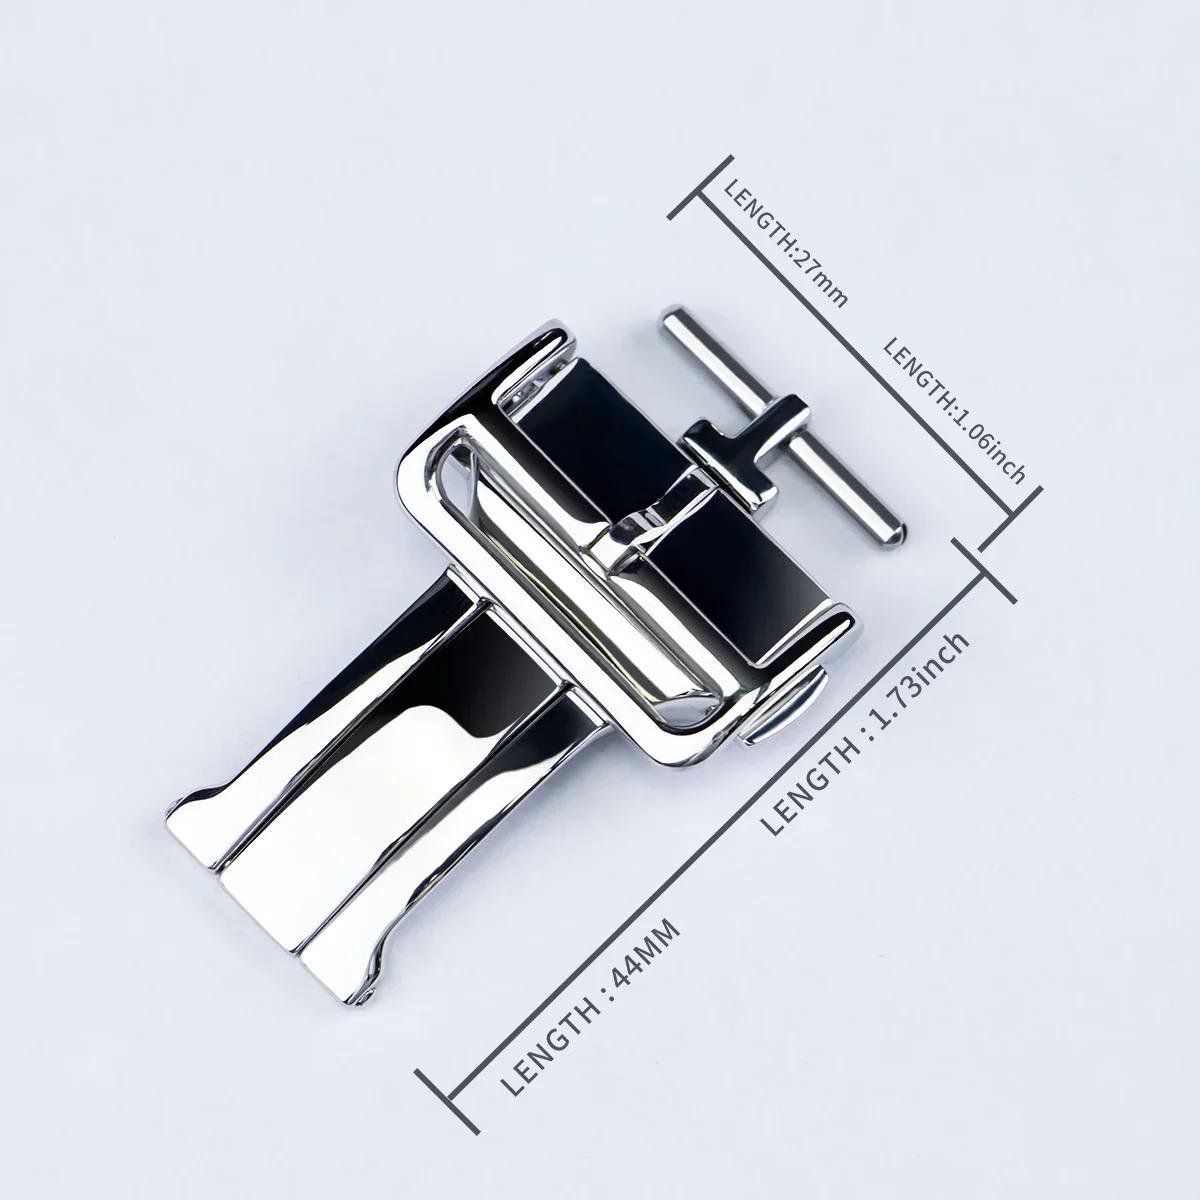 18mm 20mm Watch Strap Metal Folding Buckle Clasp Rebber Wristband Stainless Steel Buckle Automatic Deployment Watch Accessories